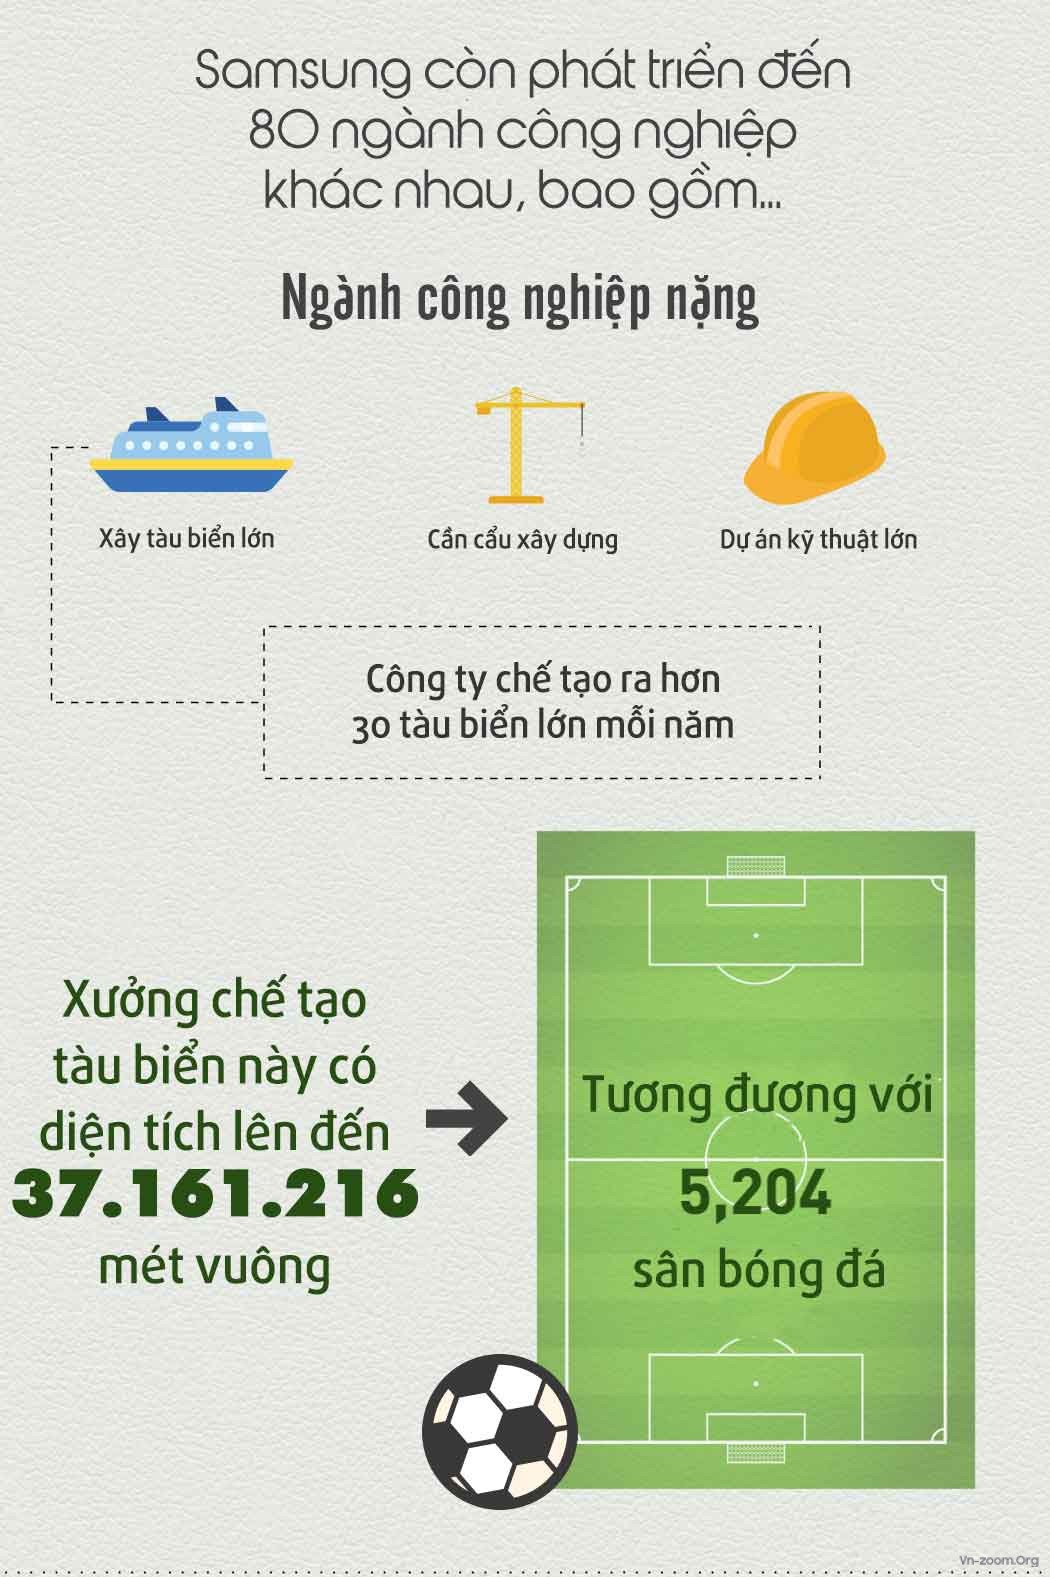 100000_how-big-is-samsung-infographic-06.jpg